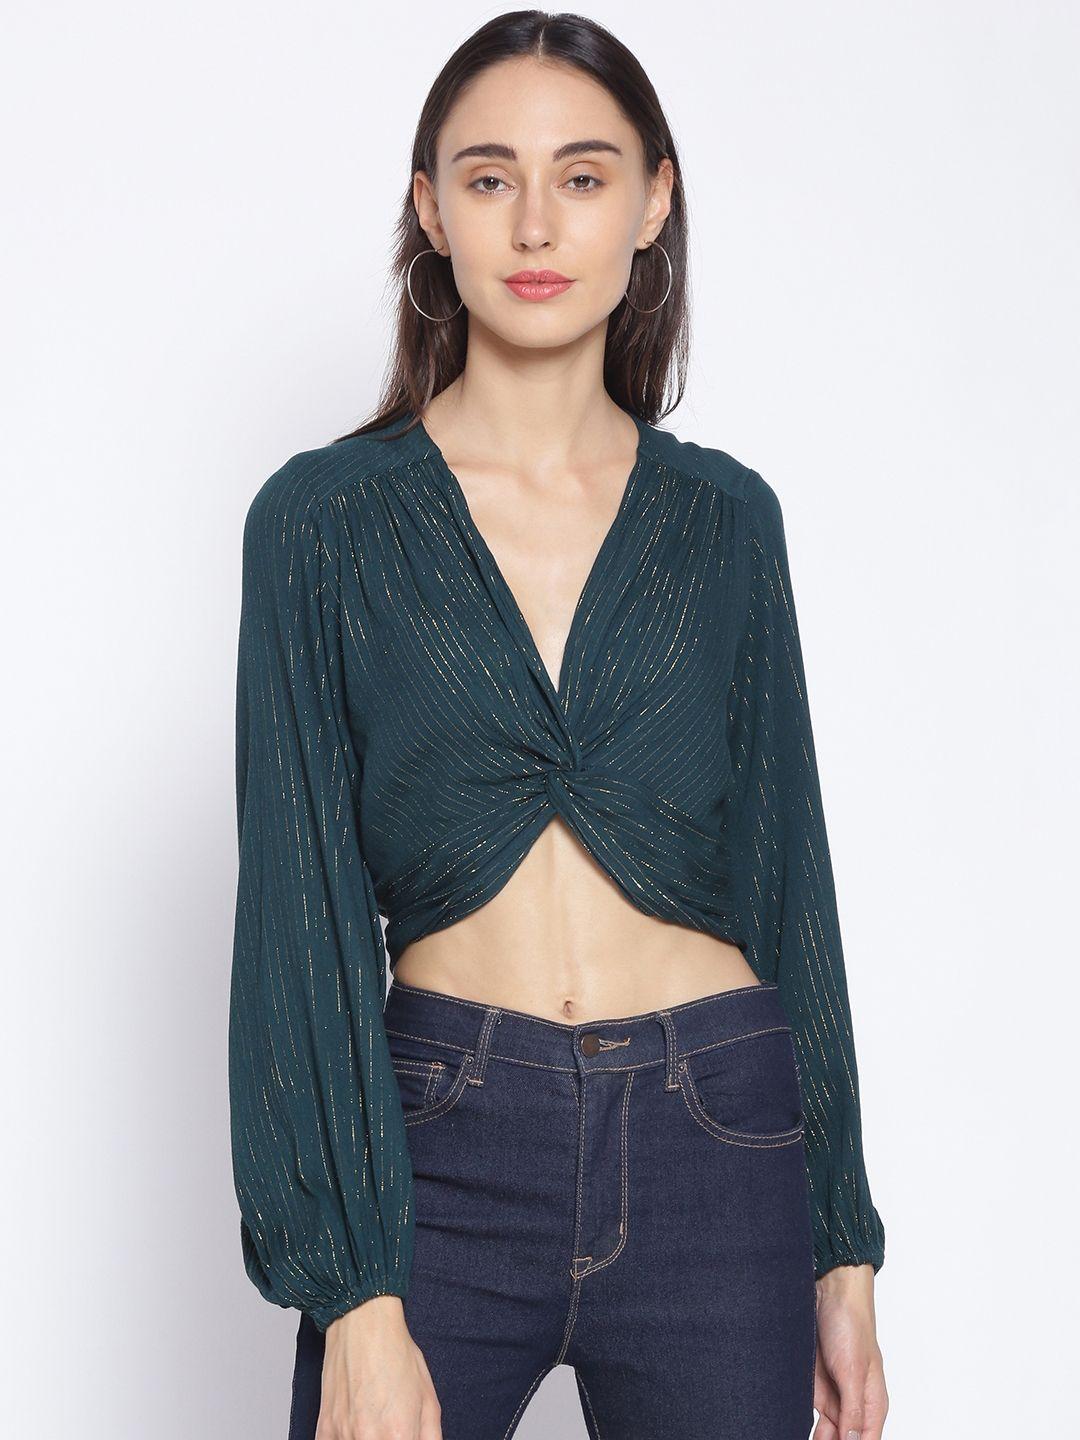 oxolloxo-teal-green-striped-twist-knot-crop-top